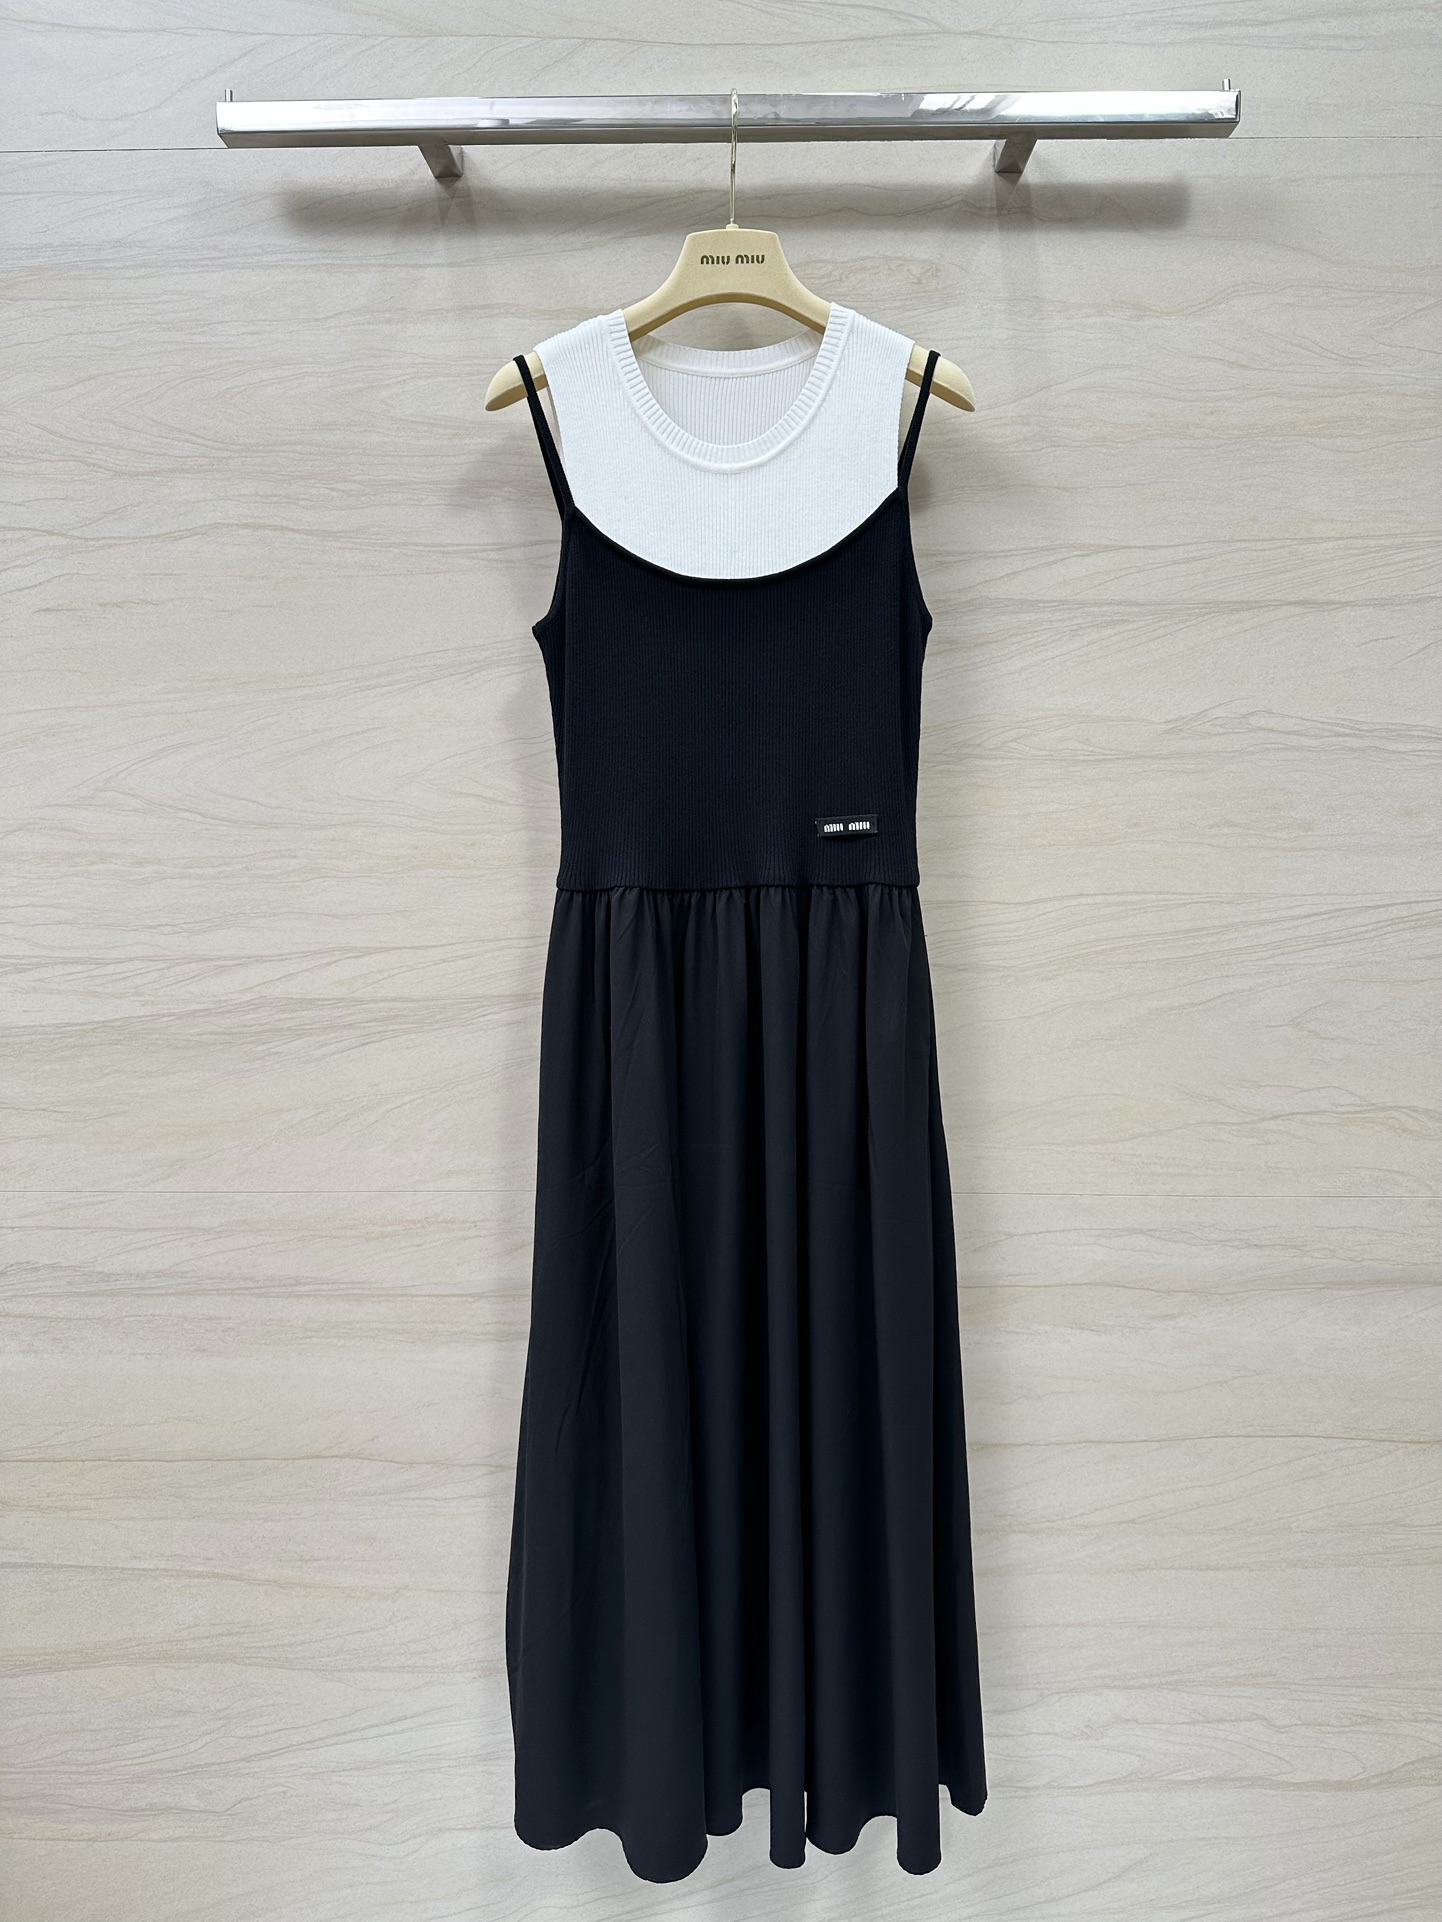 MiuMiu Best
 Clothing Dresses Tank Tops&Camis Splicing Spring/Summer Collection